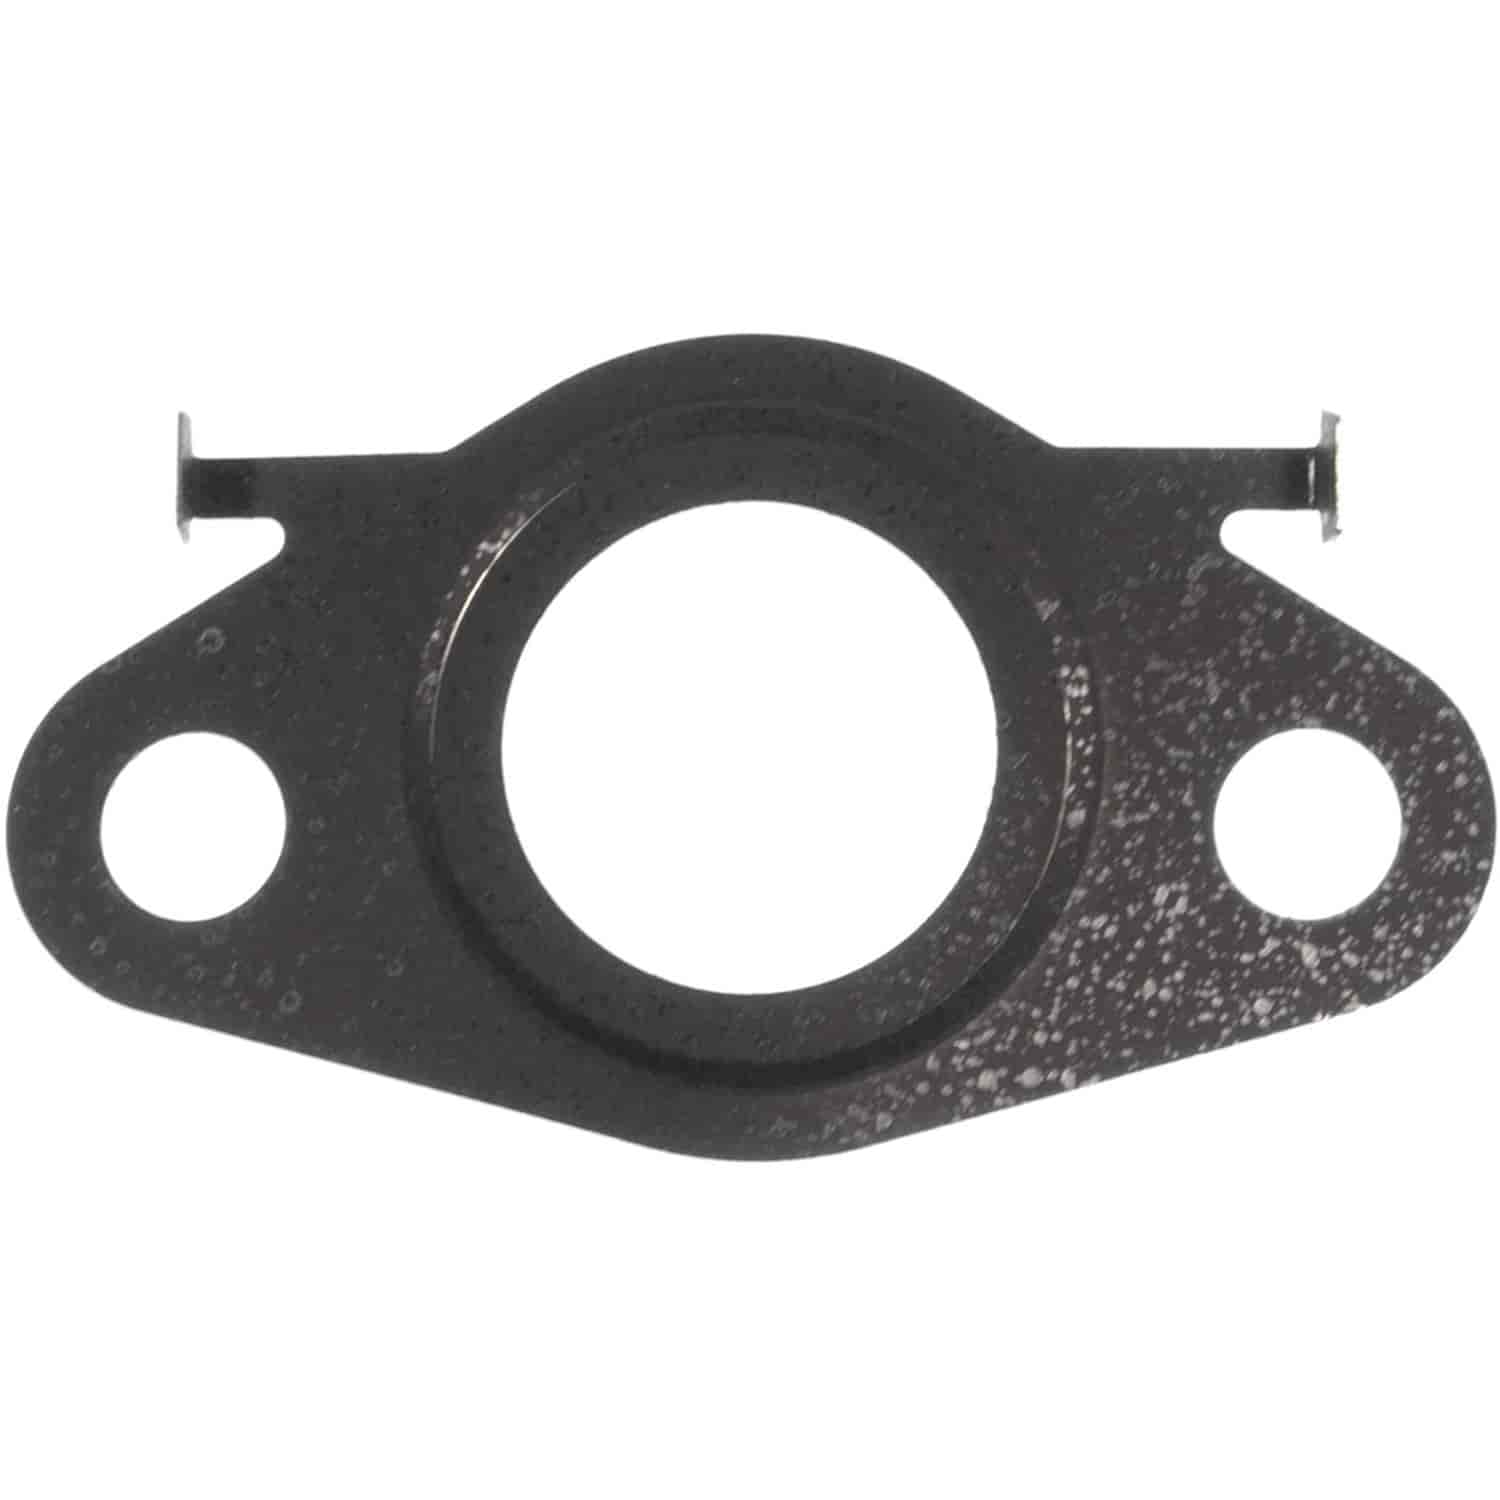 Water Outlet Gasket NISSAN / INFINITI 5552cc 5.6L